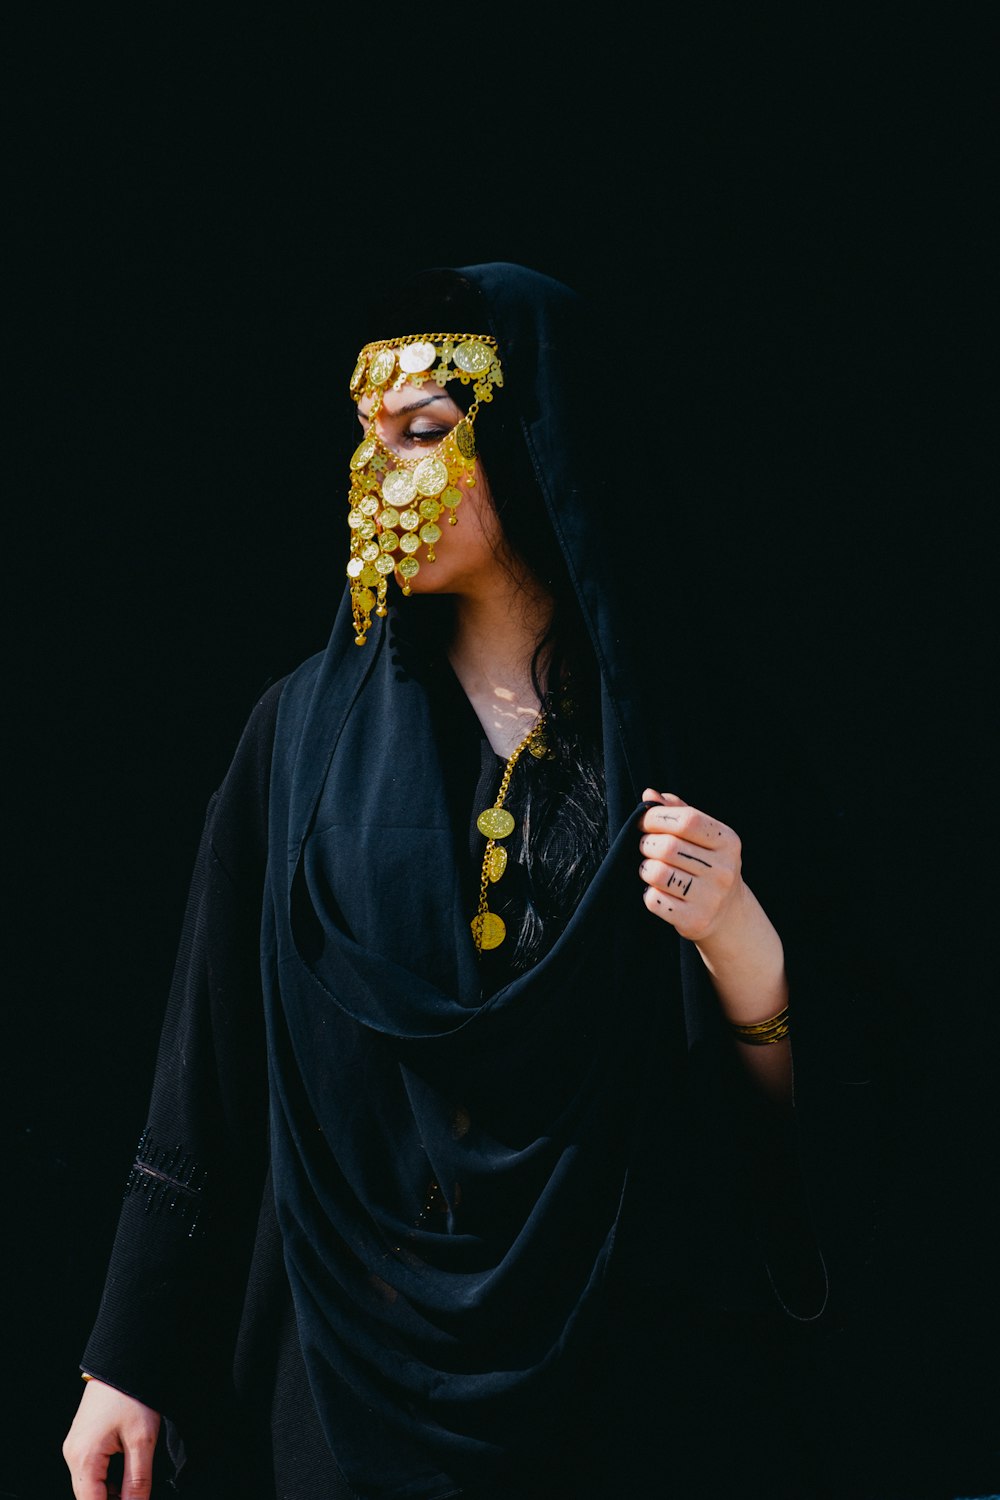 a woman wearing a black veil and gold jewelry